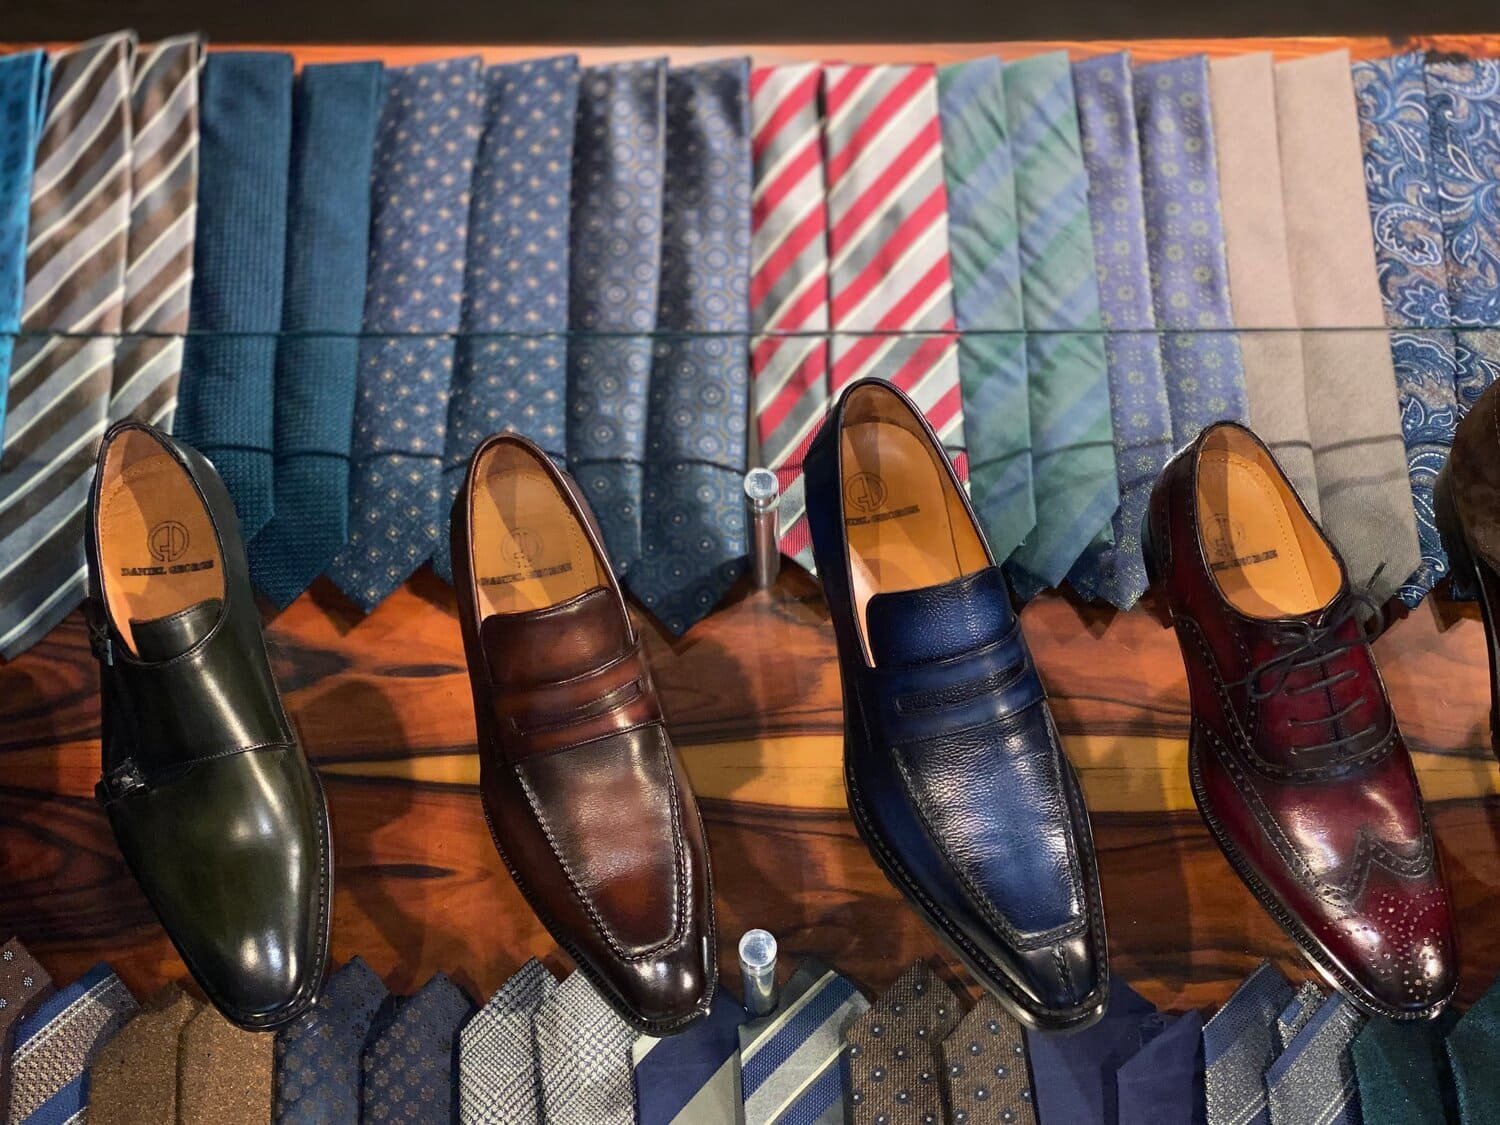 reap Monk subtle Custom Men's Dress Shoes in Chicago and San Francisco